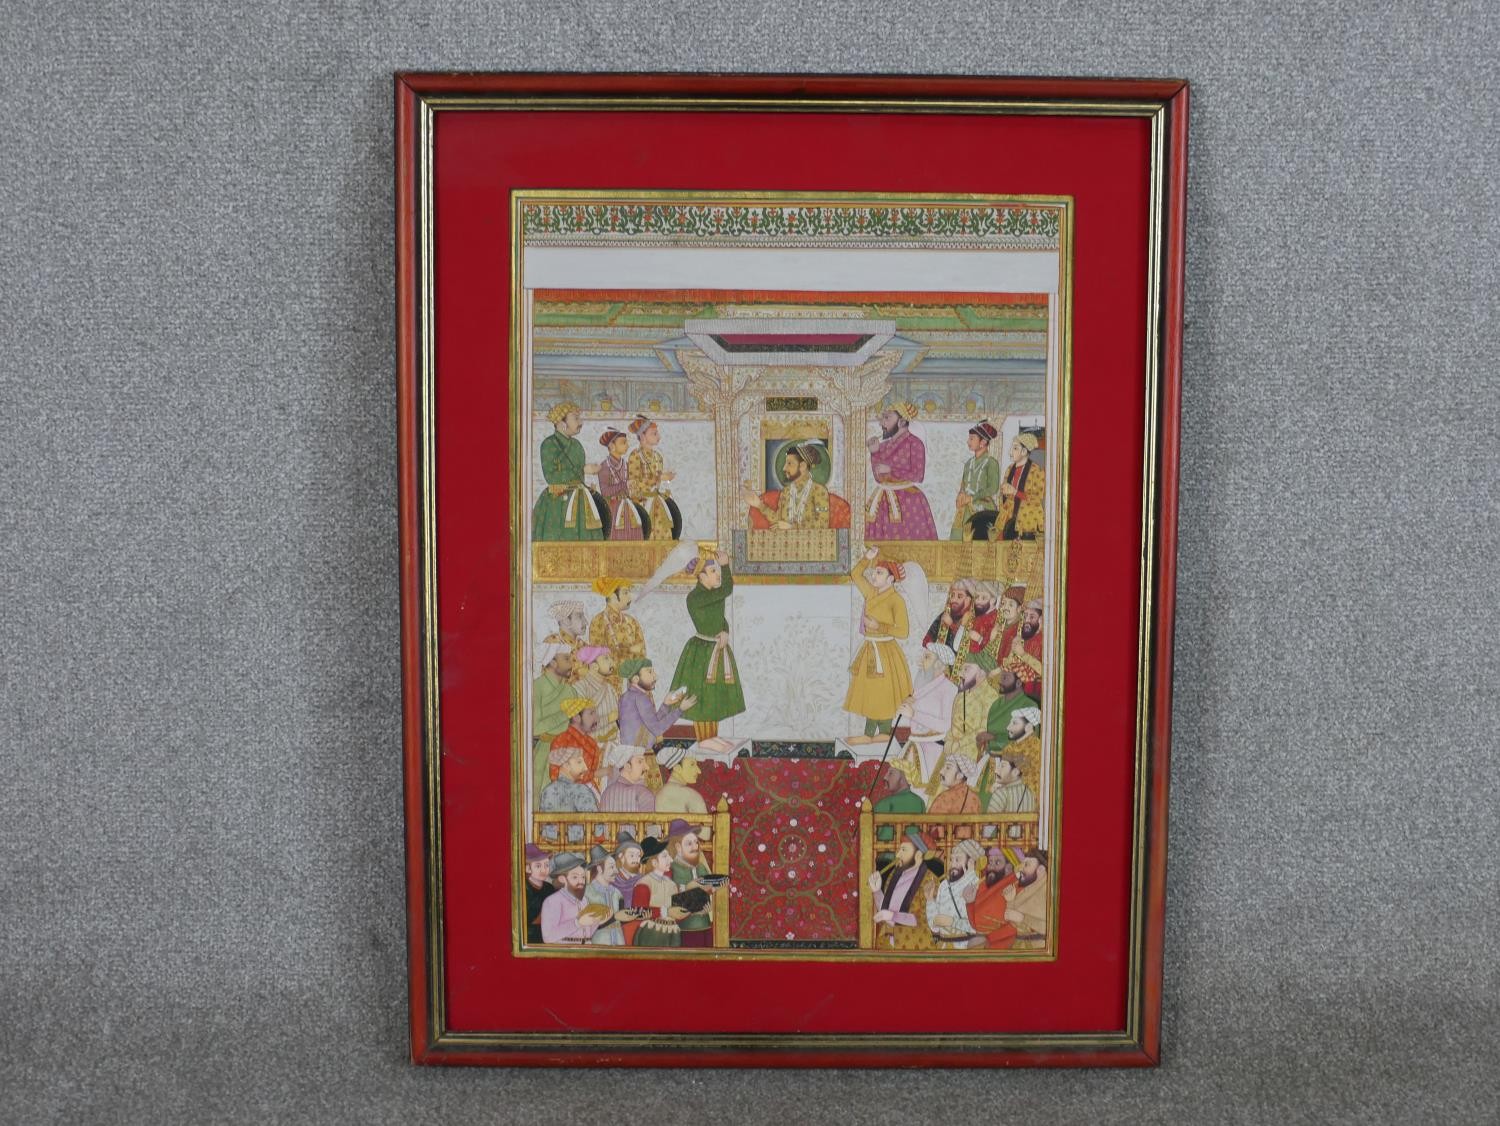 Mougal School, Europeans bring gifts to Shah Jahan, mixed media on paper, framed H.75 W.58.5cm